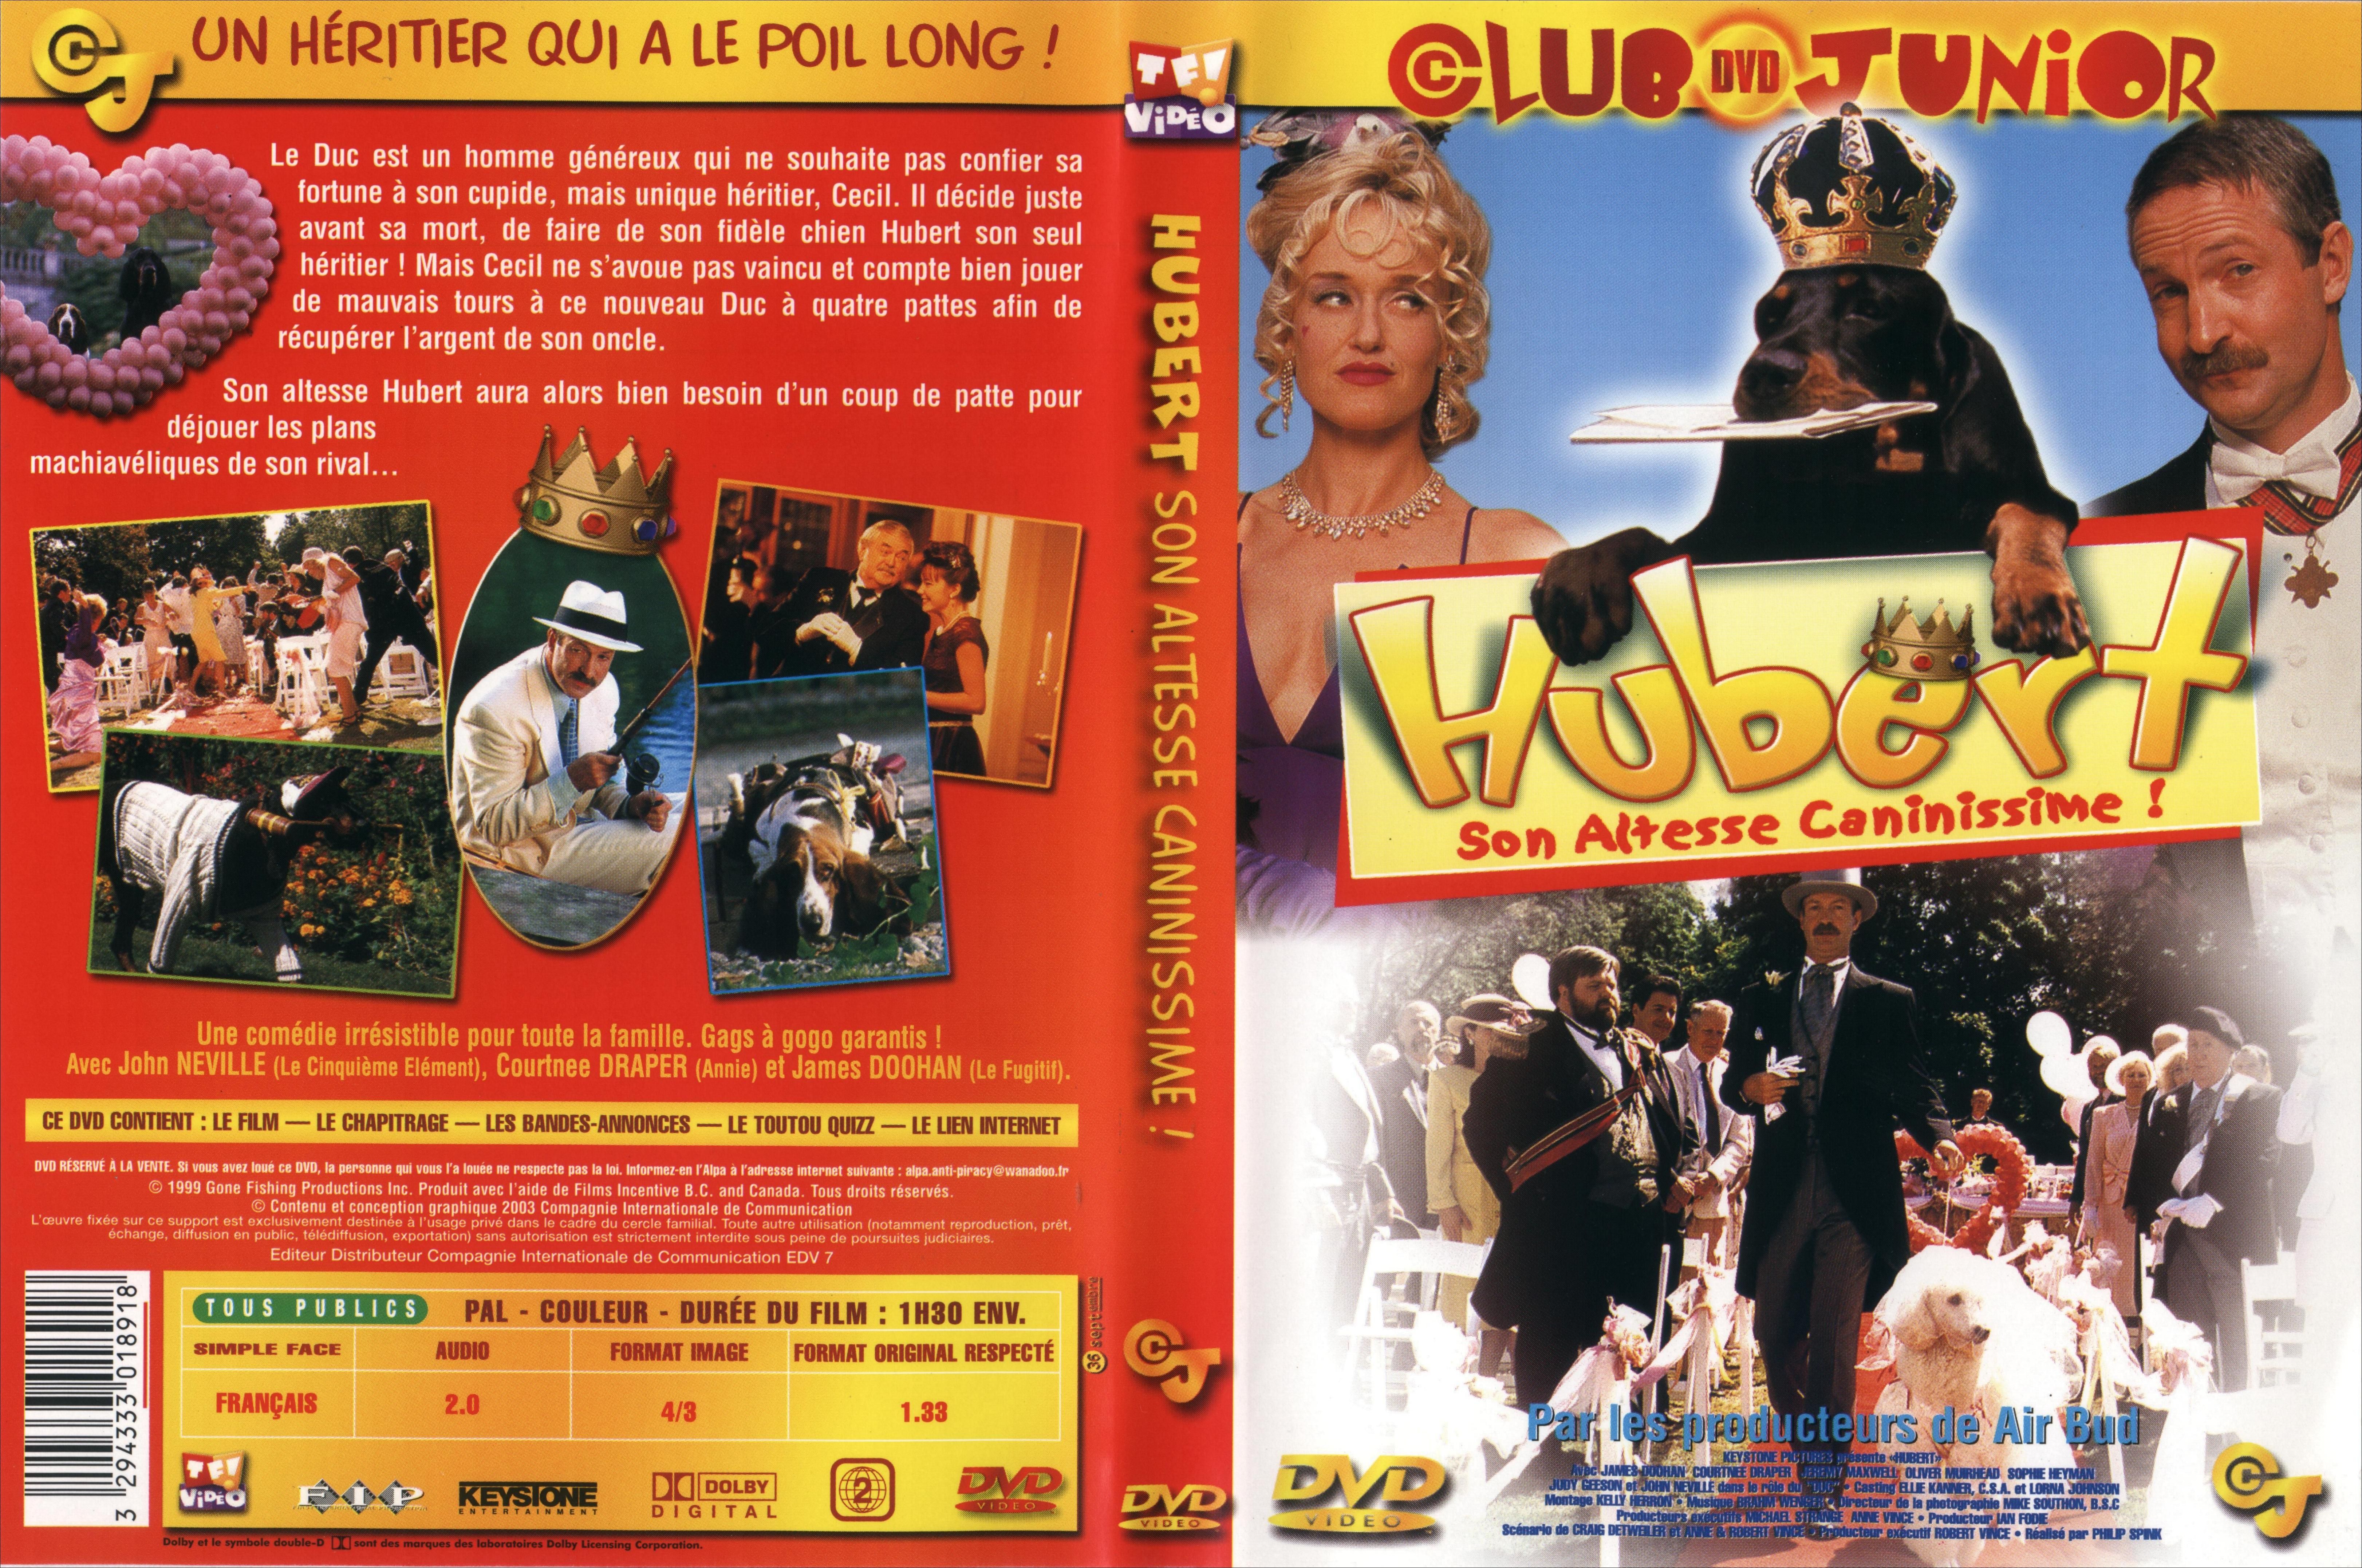 Jaquette DVD Hubert son altesse caninissime